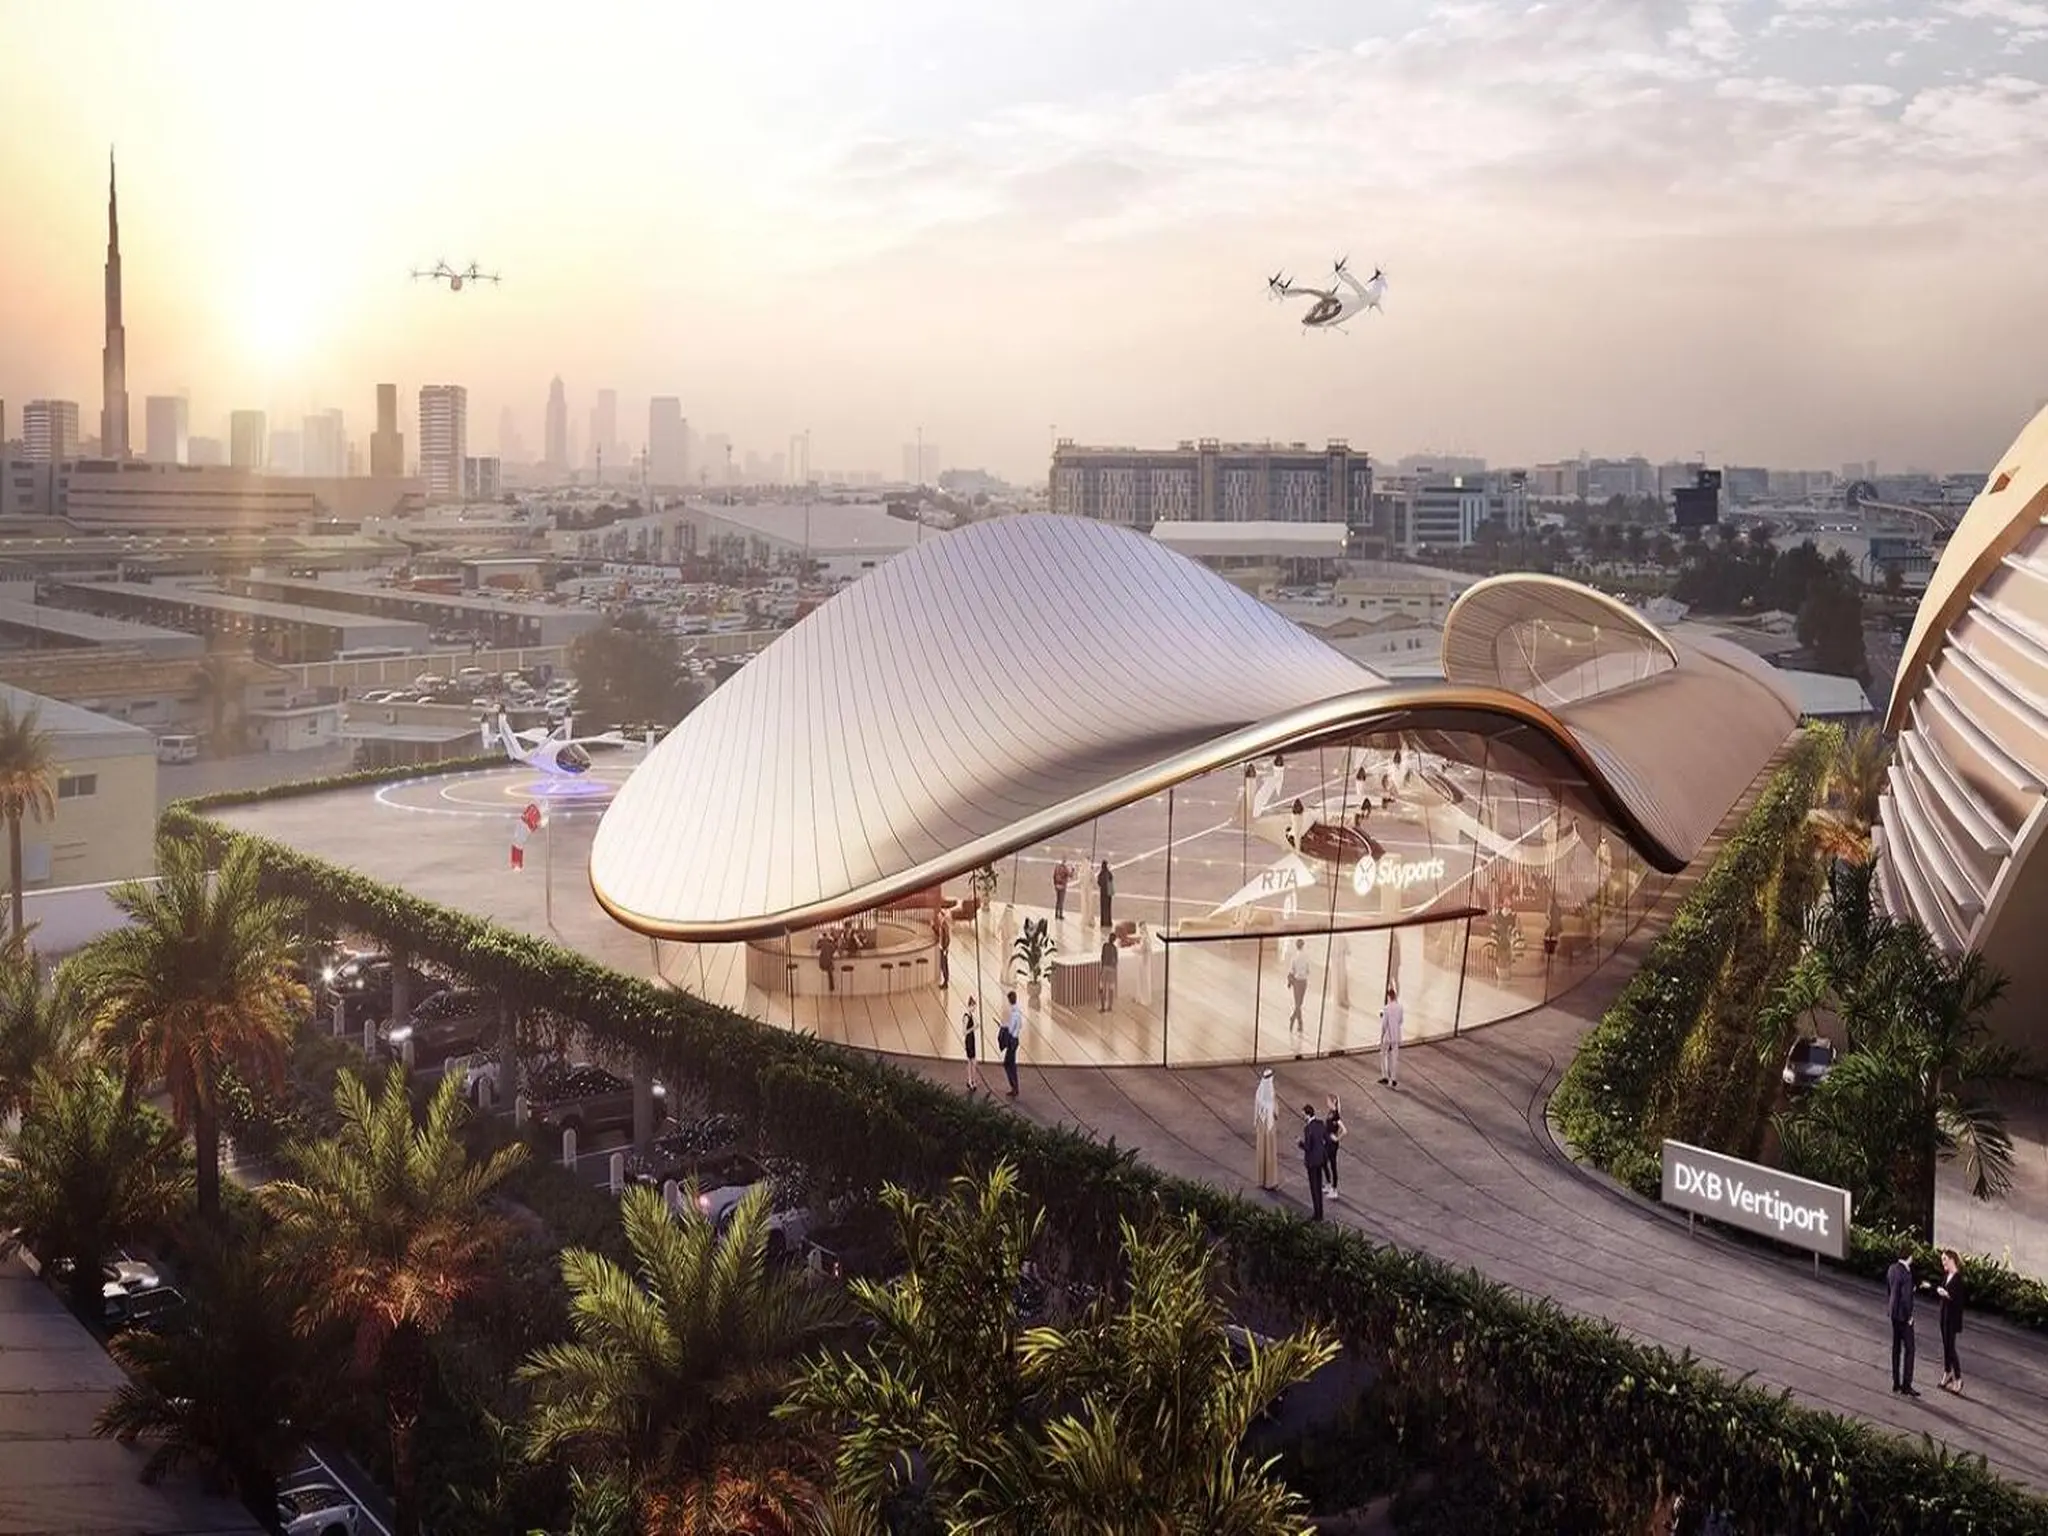 Photos depict how Dubai's flying taxi terminals will appear when they are constructed near DXB.